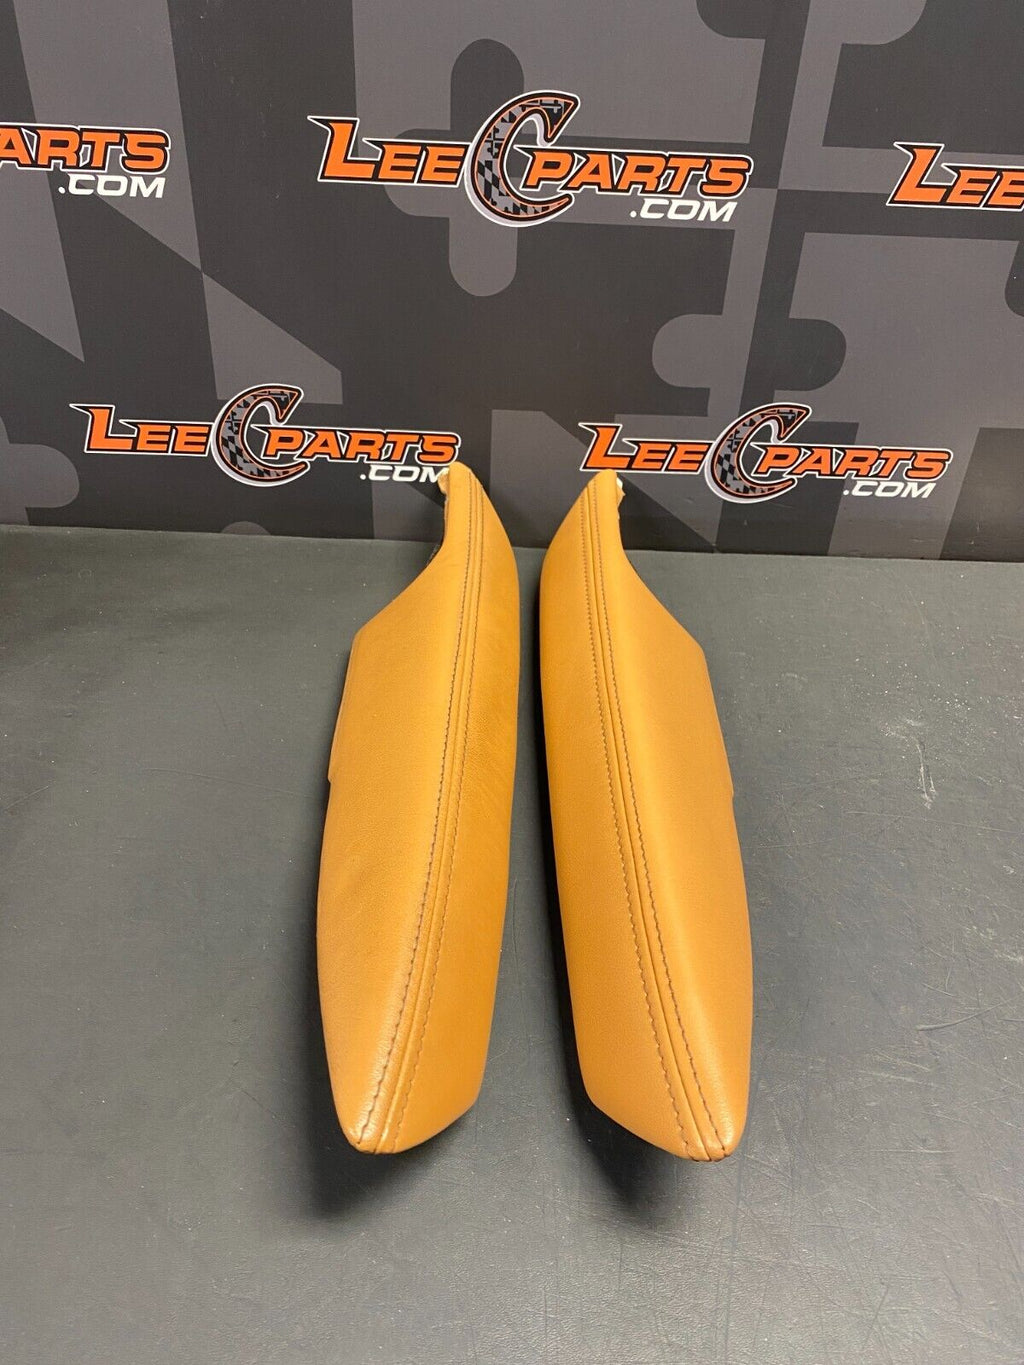 2013 CHEVROLET CAMARO SS OEM DOOR PANEL ARM RESTS TAN LEATHER RARE!! USED